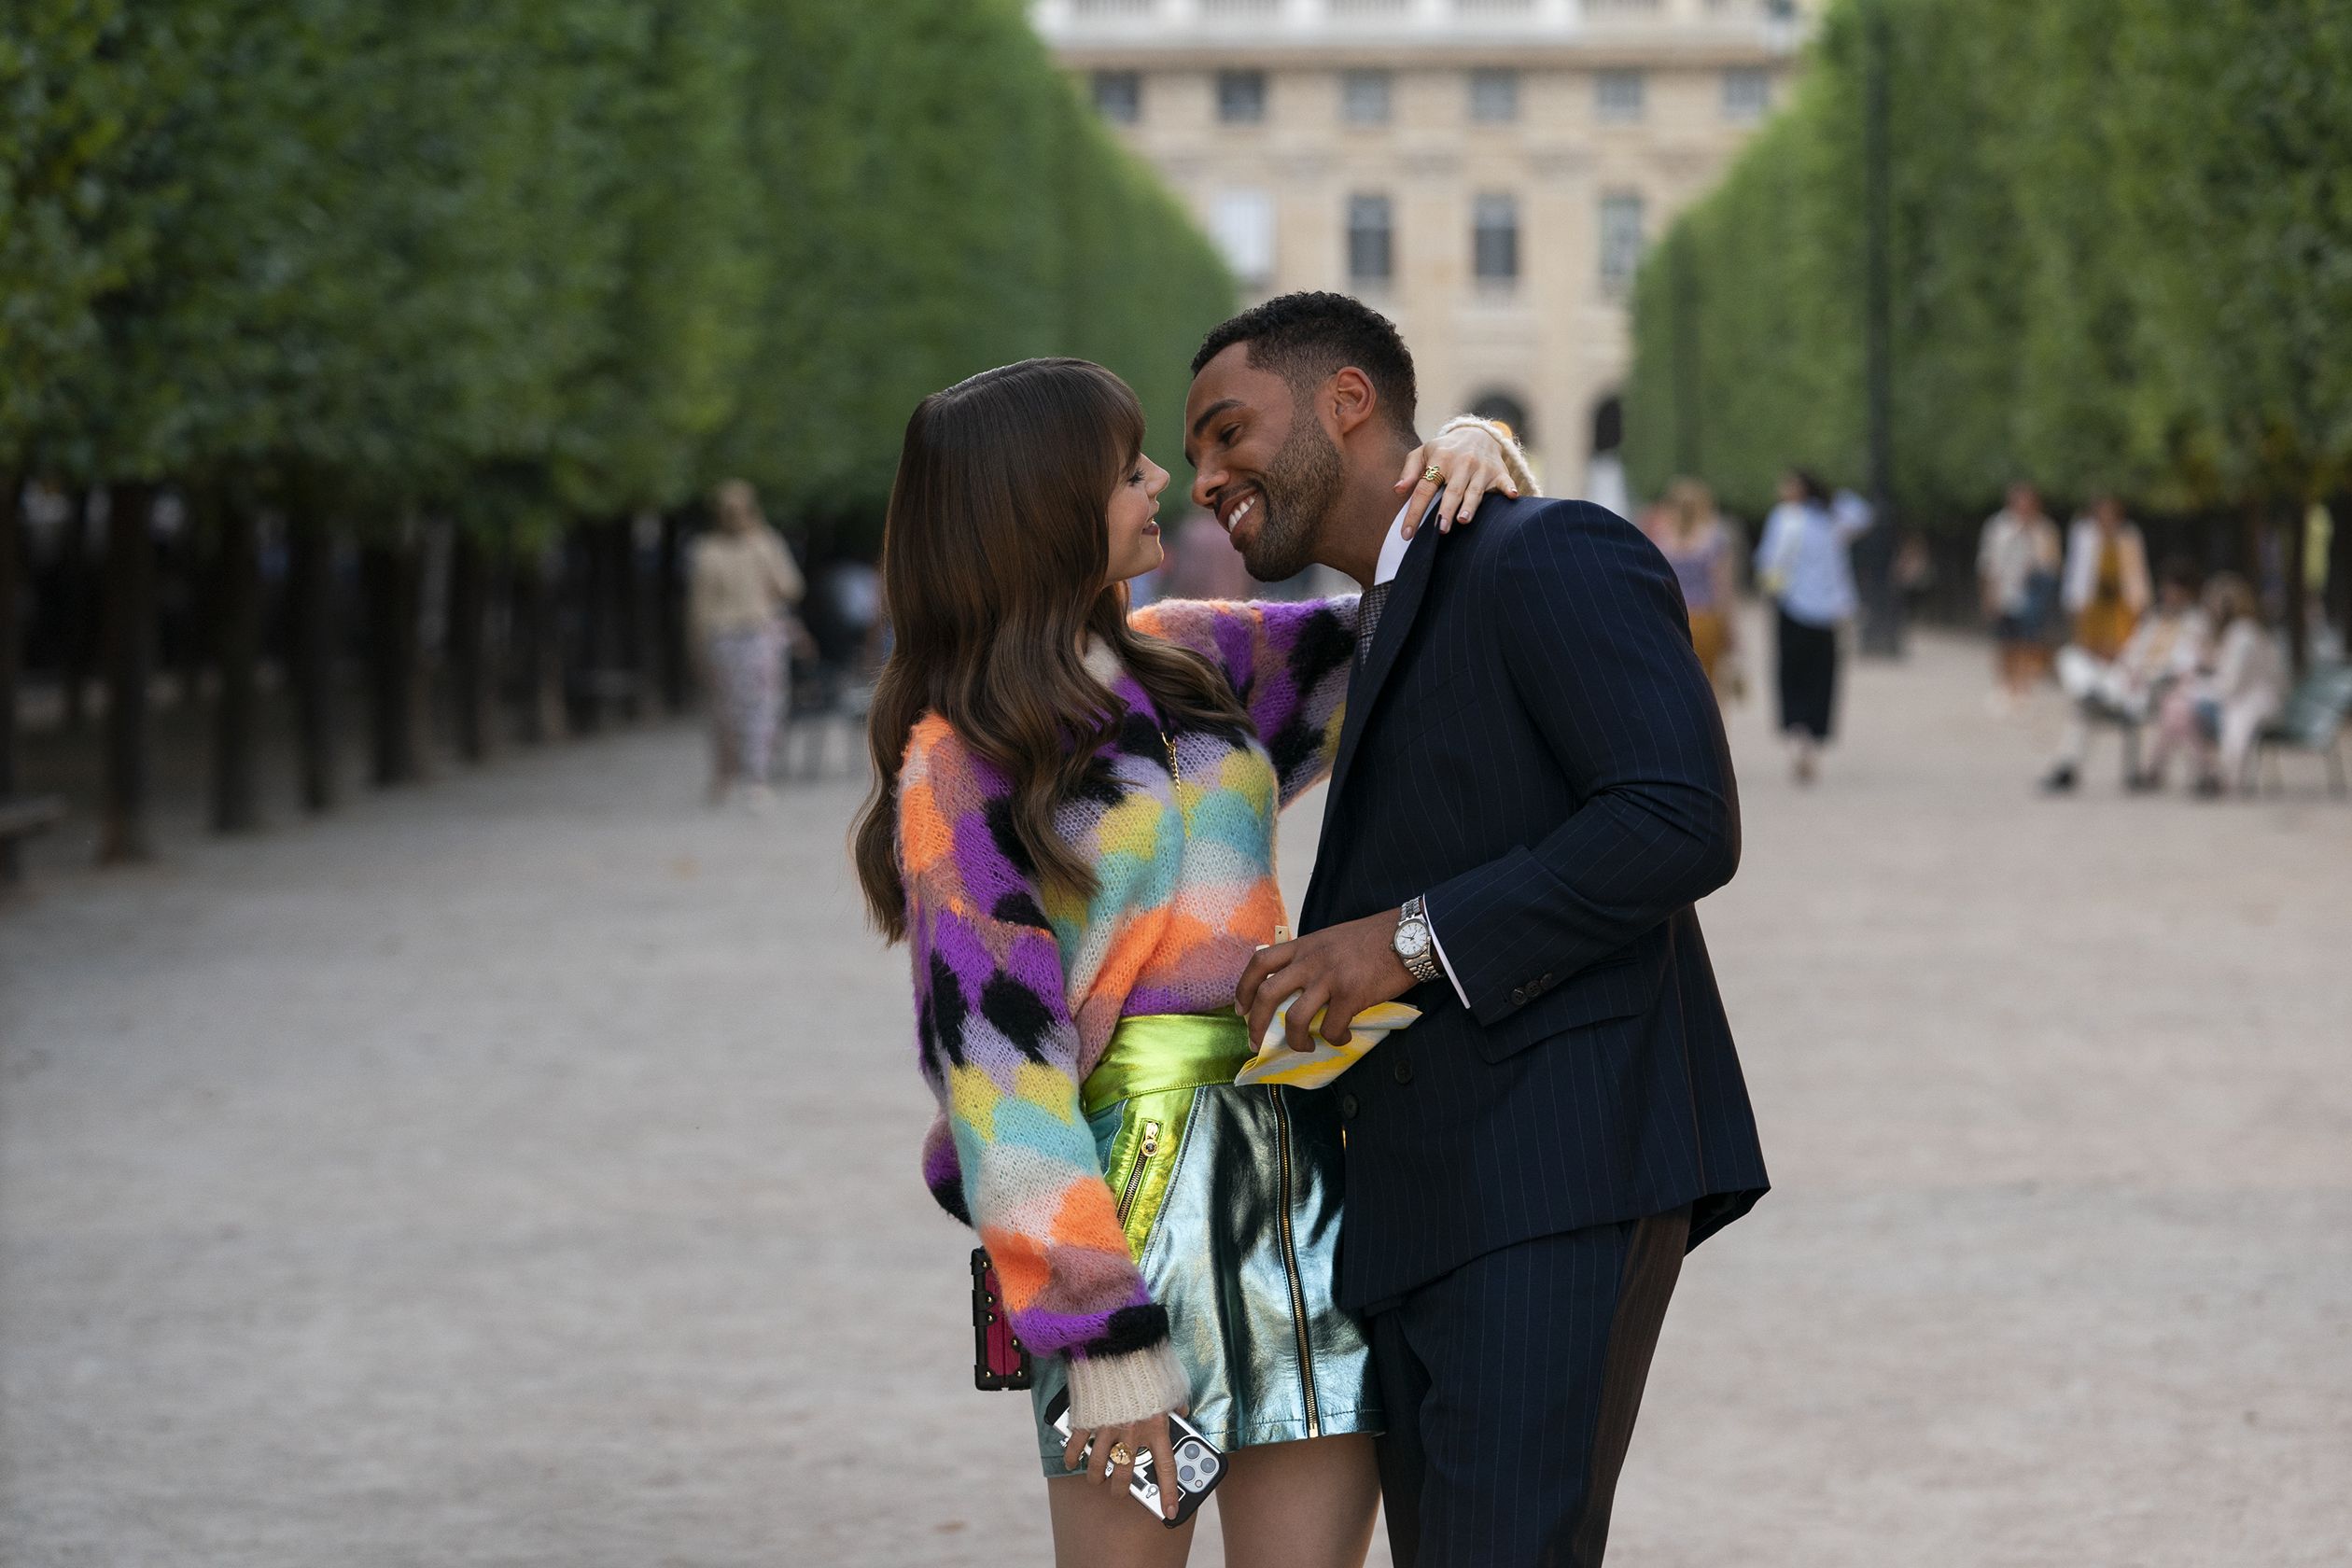 Who Is Lucien Laviscount? The 'Emily in Paris' Season 2 Star on